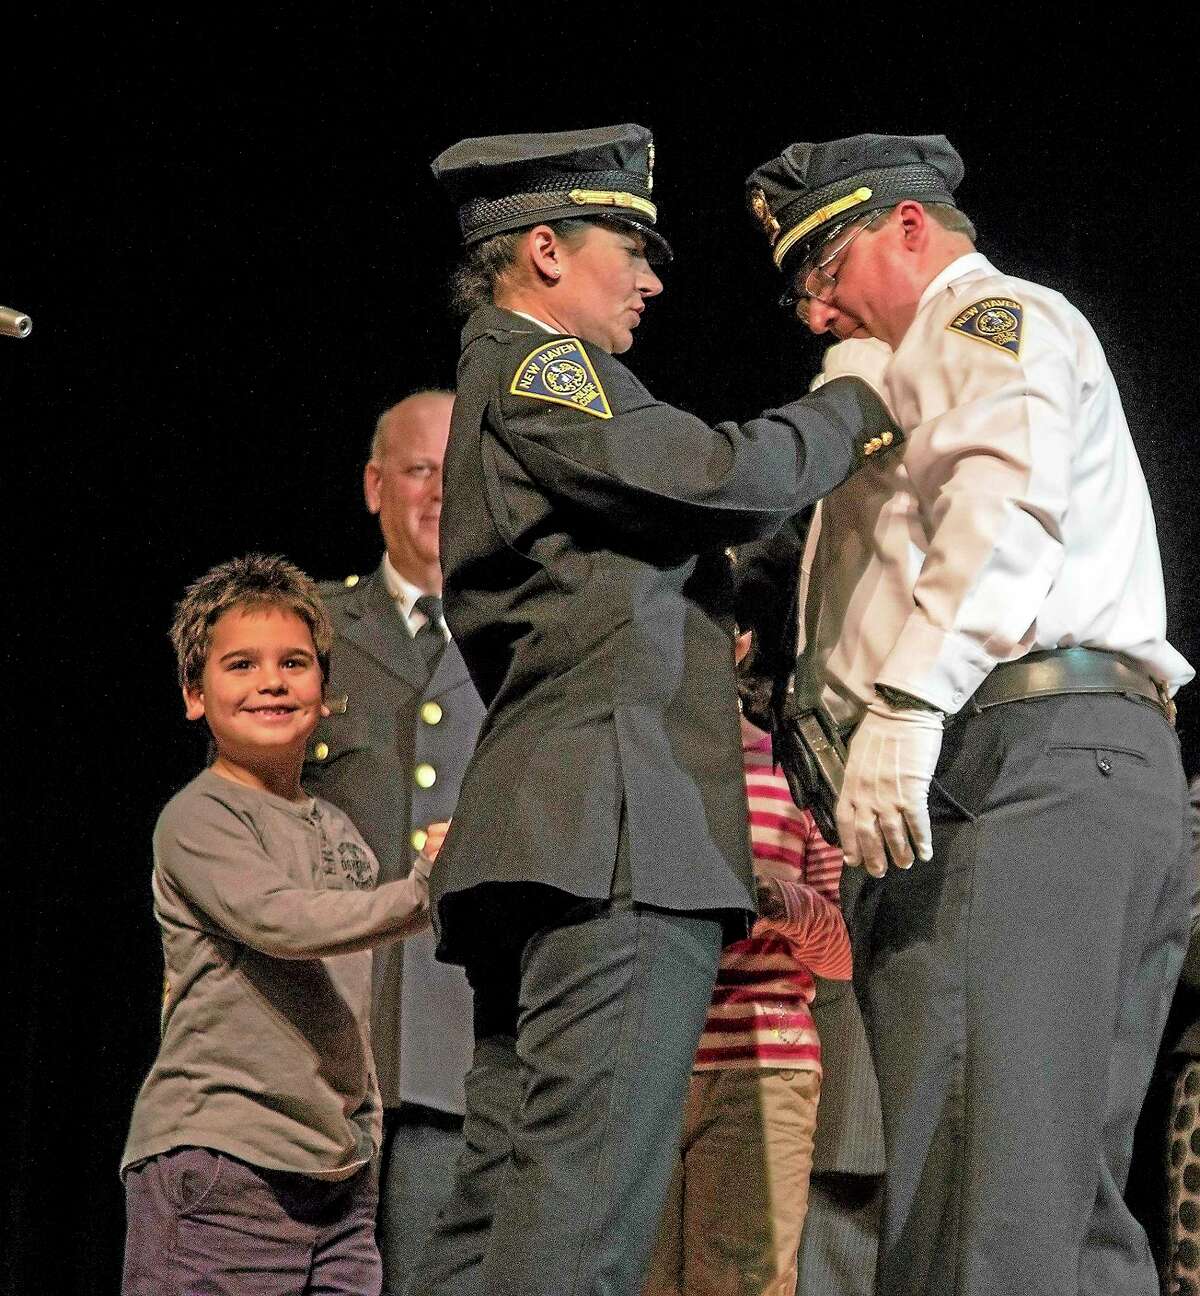 Danny Johnson, 8, beams as his mother, New Haven police Lt. Julie Johnson, pins a badge on Lt. Herb Johnson during Friday night’s New Haven police promotion ceremony.